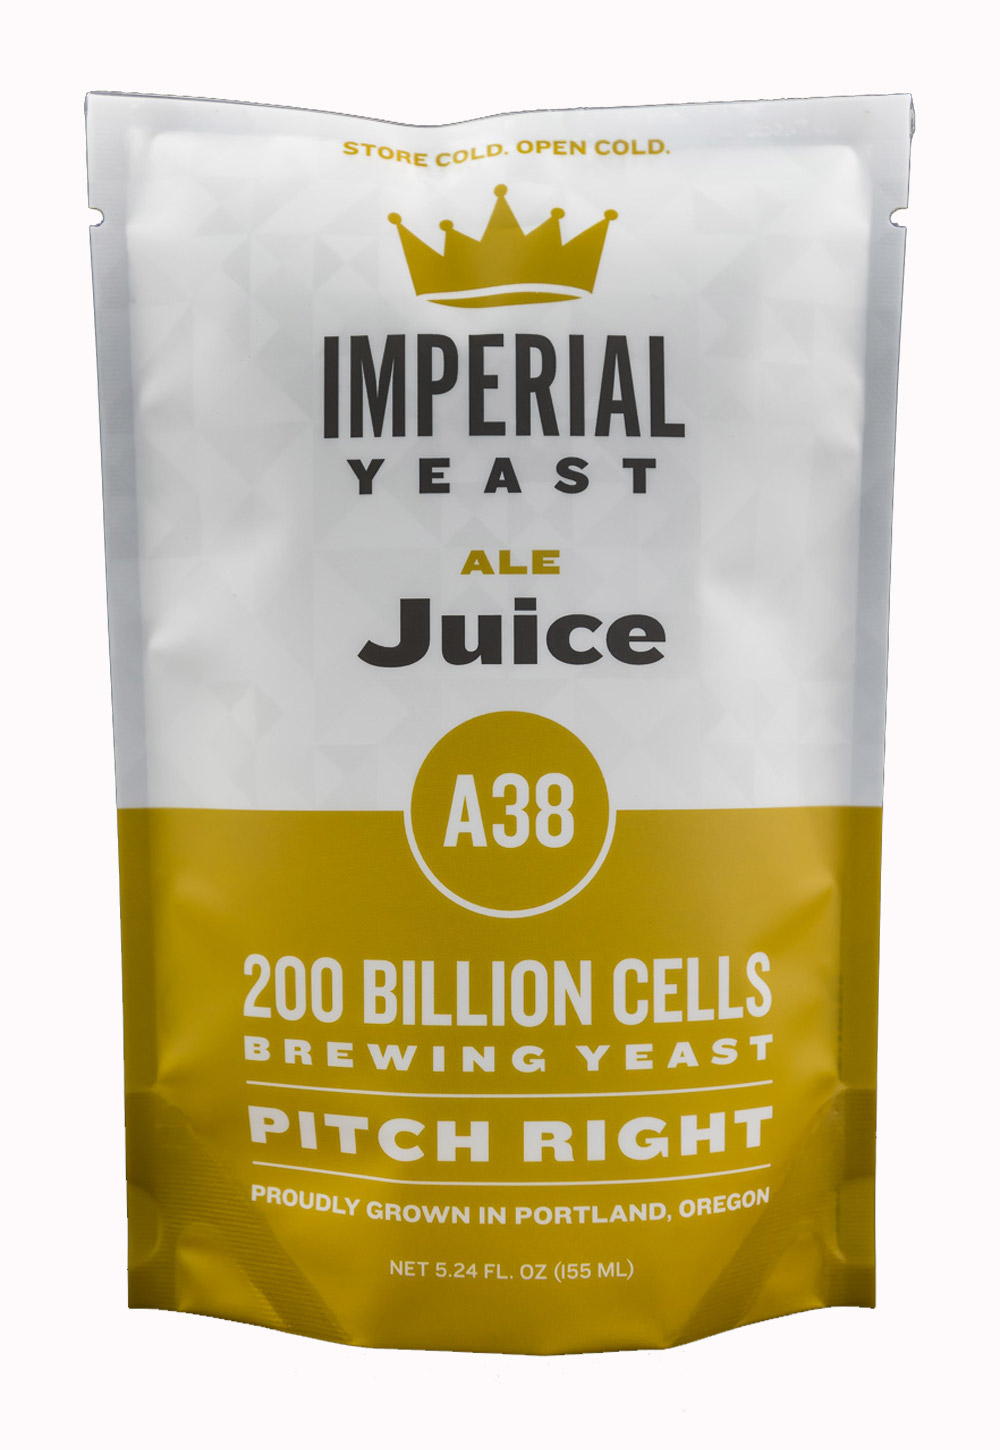 A38 Juice Ale Yeast from Imperial Yeast